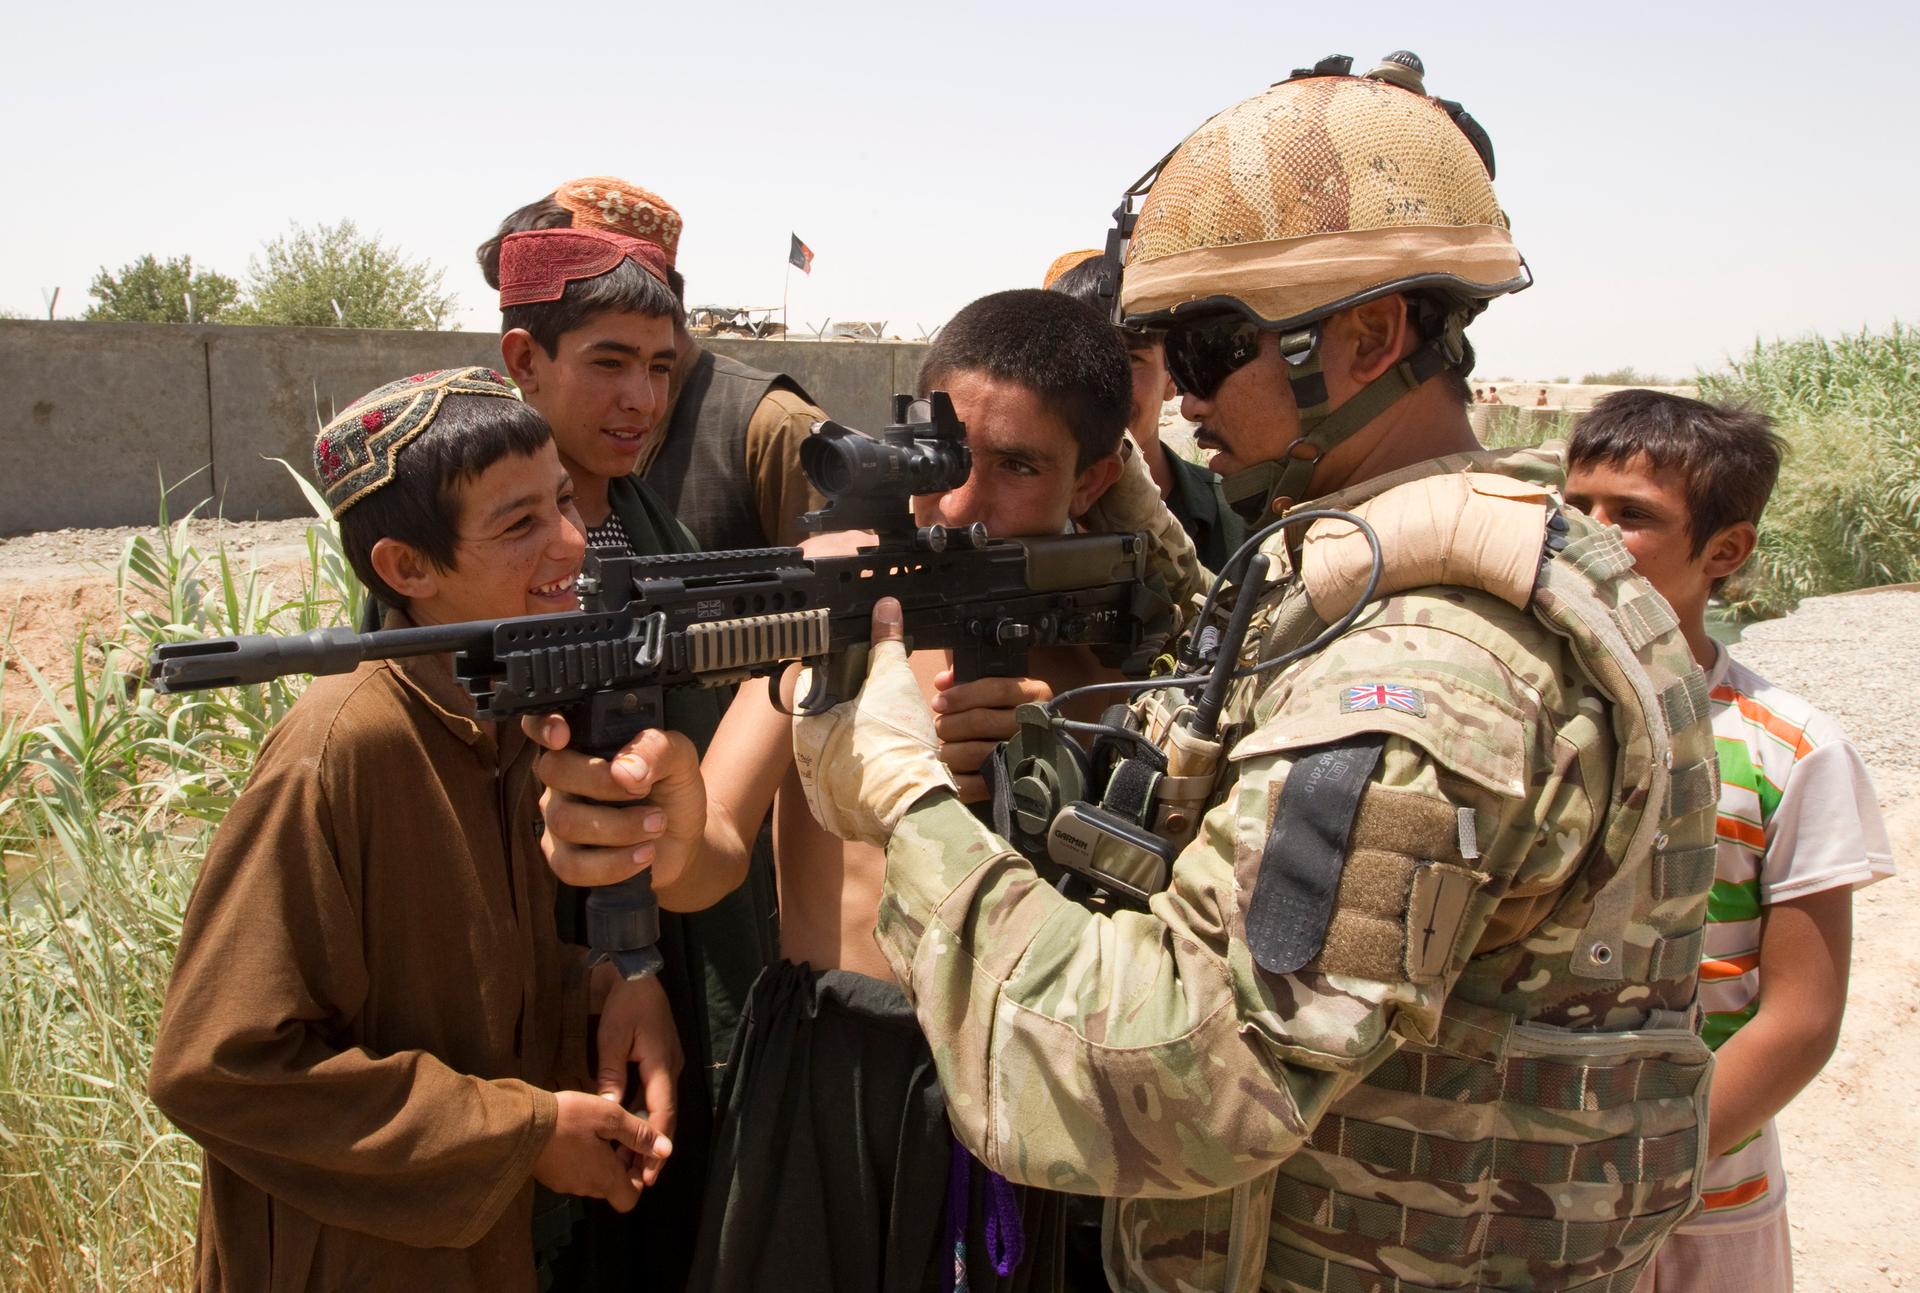 British Army Cpl. Birendra Limbu of the 2nd Battalion, The Royal Gurkha Rifles, shows his rifle to Afghan children outside the town of Lashkar Gah in Helmand province.